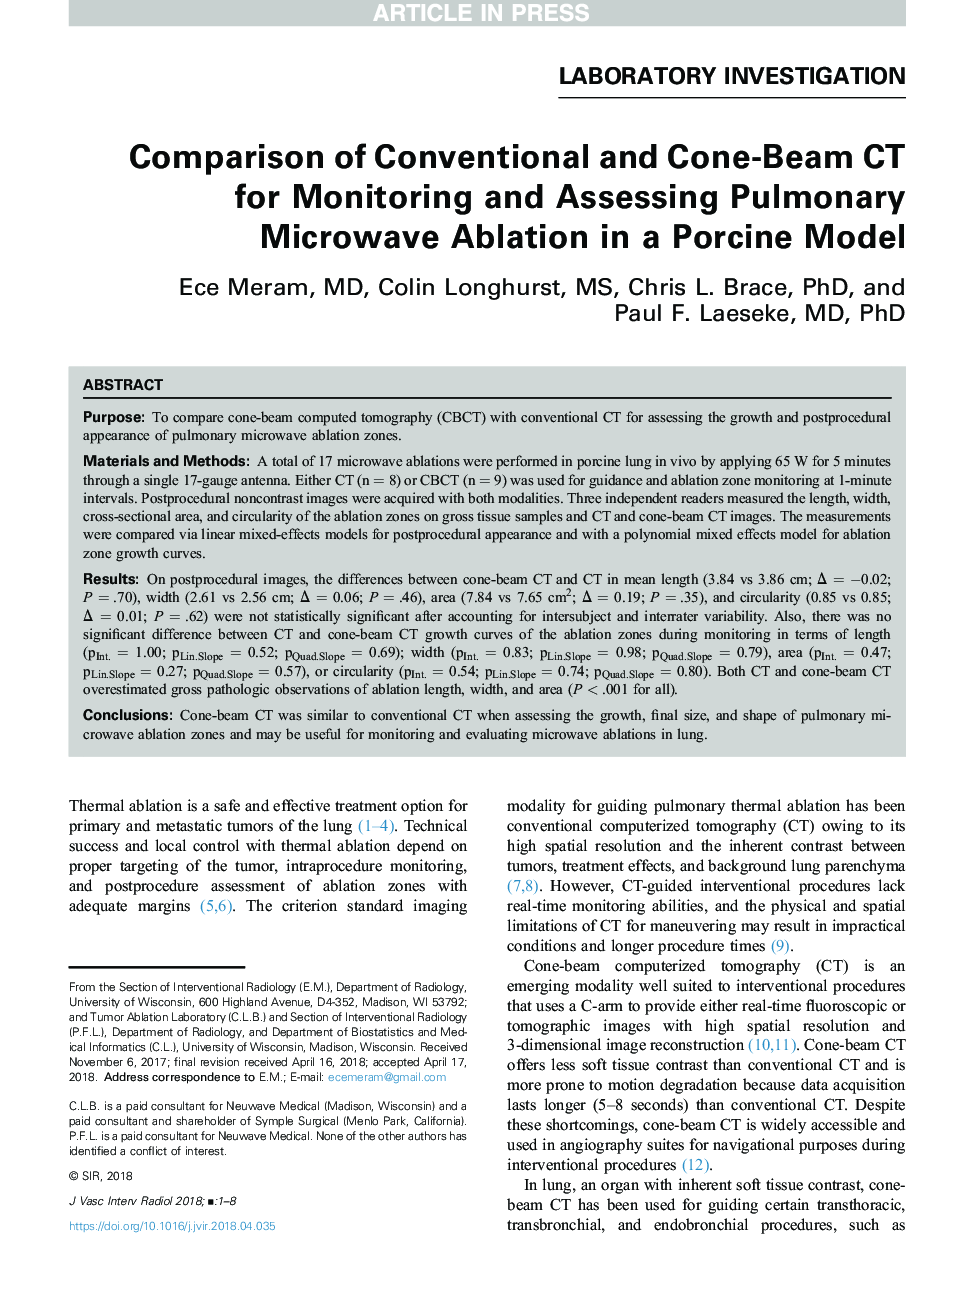 Comparison of Conventional and Cone-Beam CT for Monitoring and Assessing Pulmonary Microwave Ablation in a Porcine Model